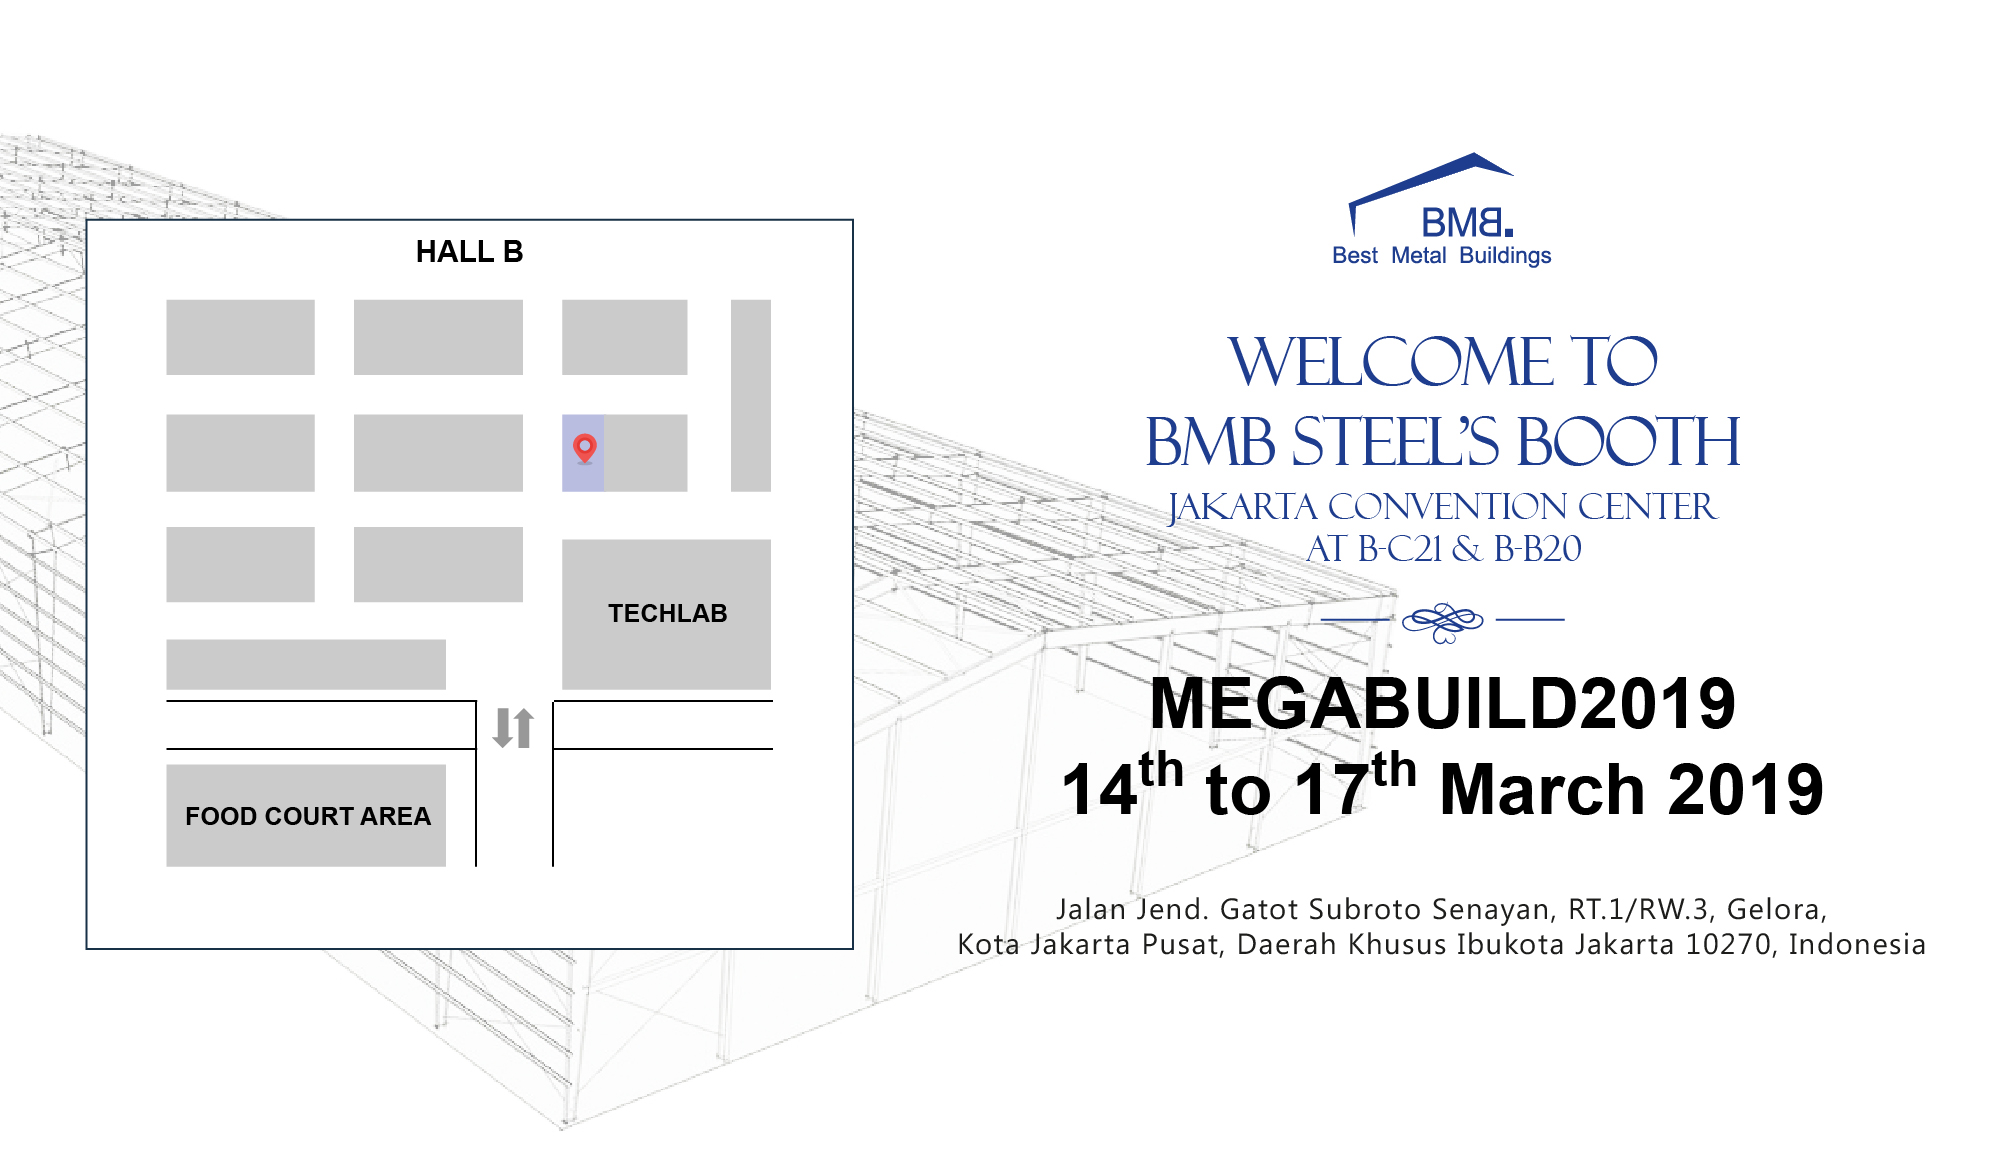 WELCOME TO BMB STEEL'S BOOTH AT MEGABUILD INDONESIA